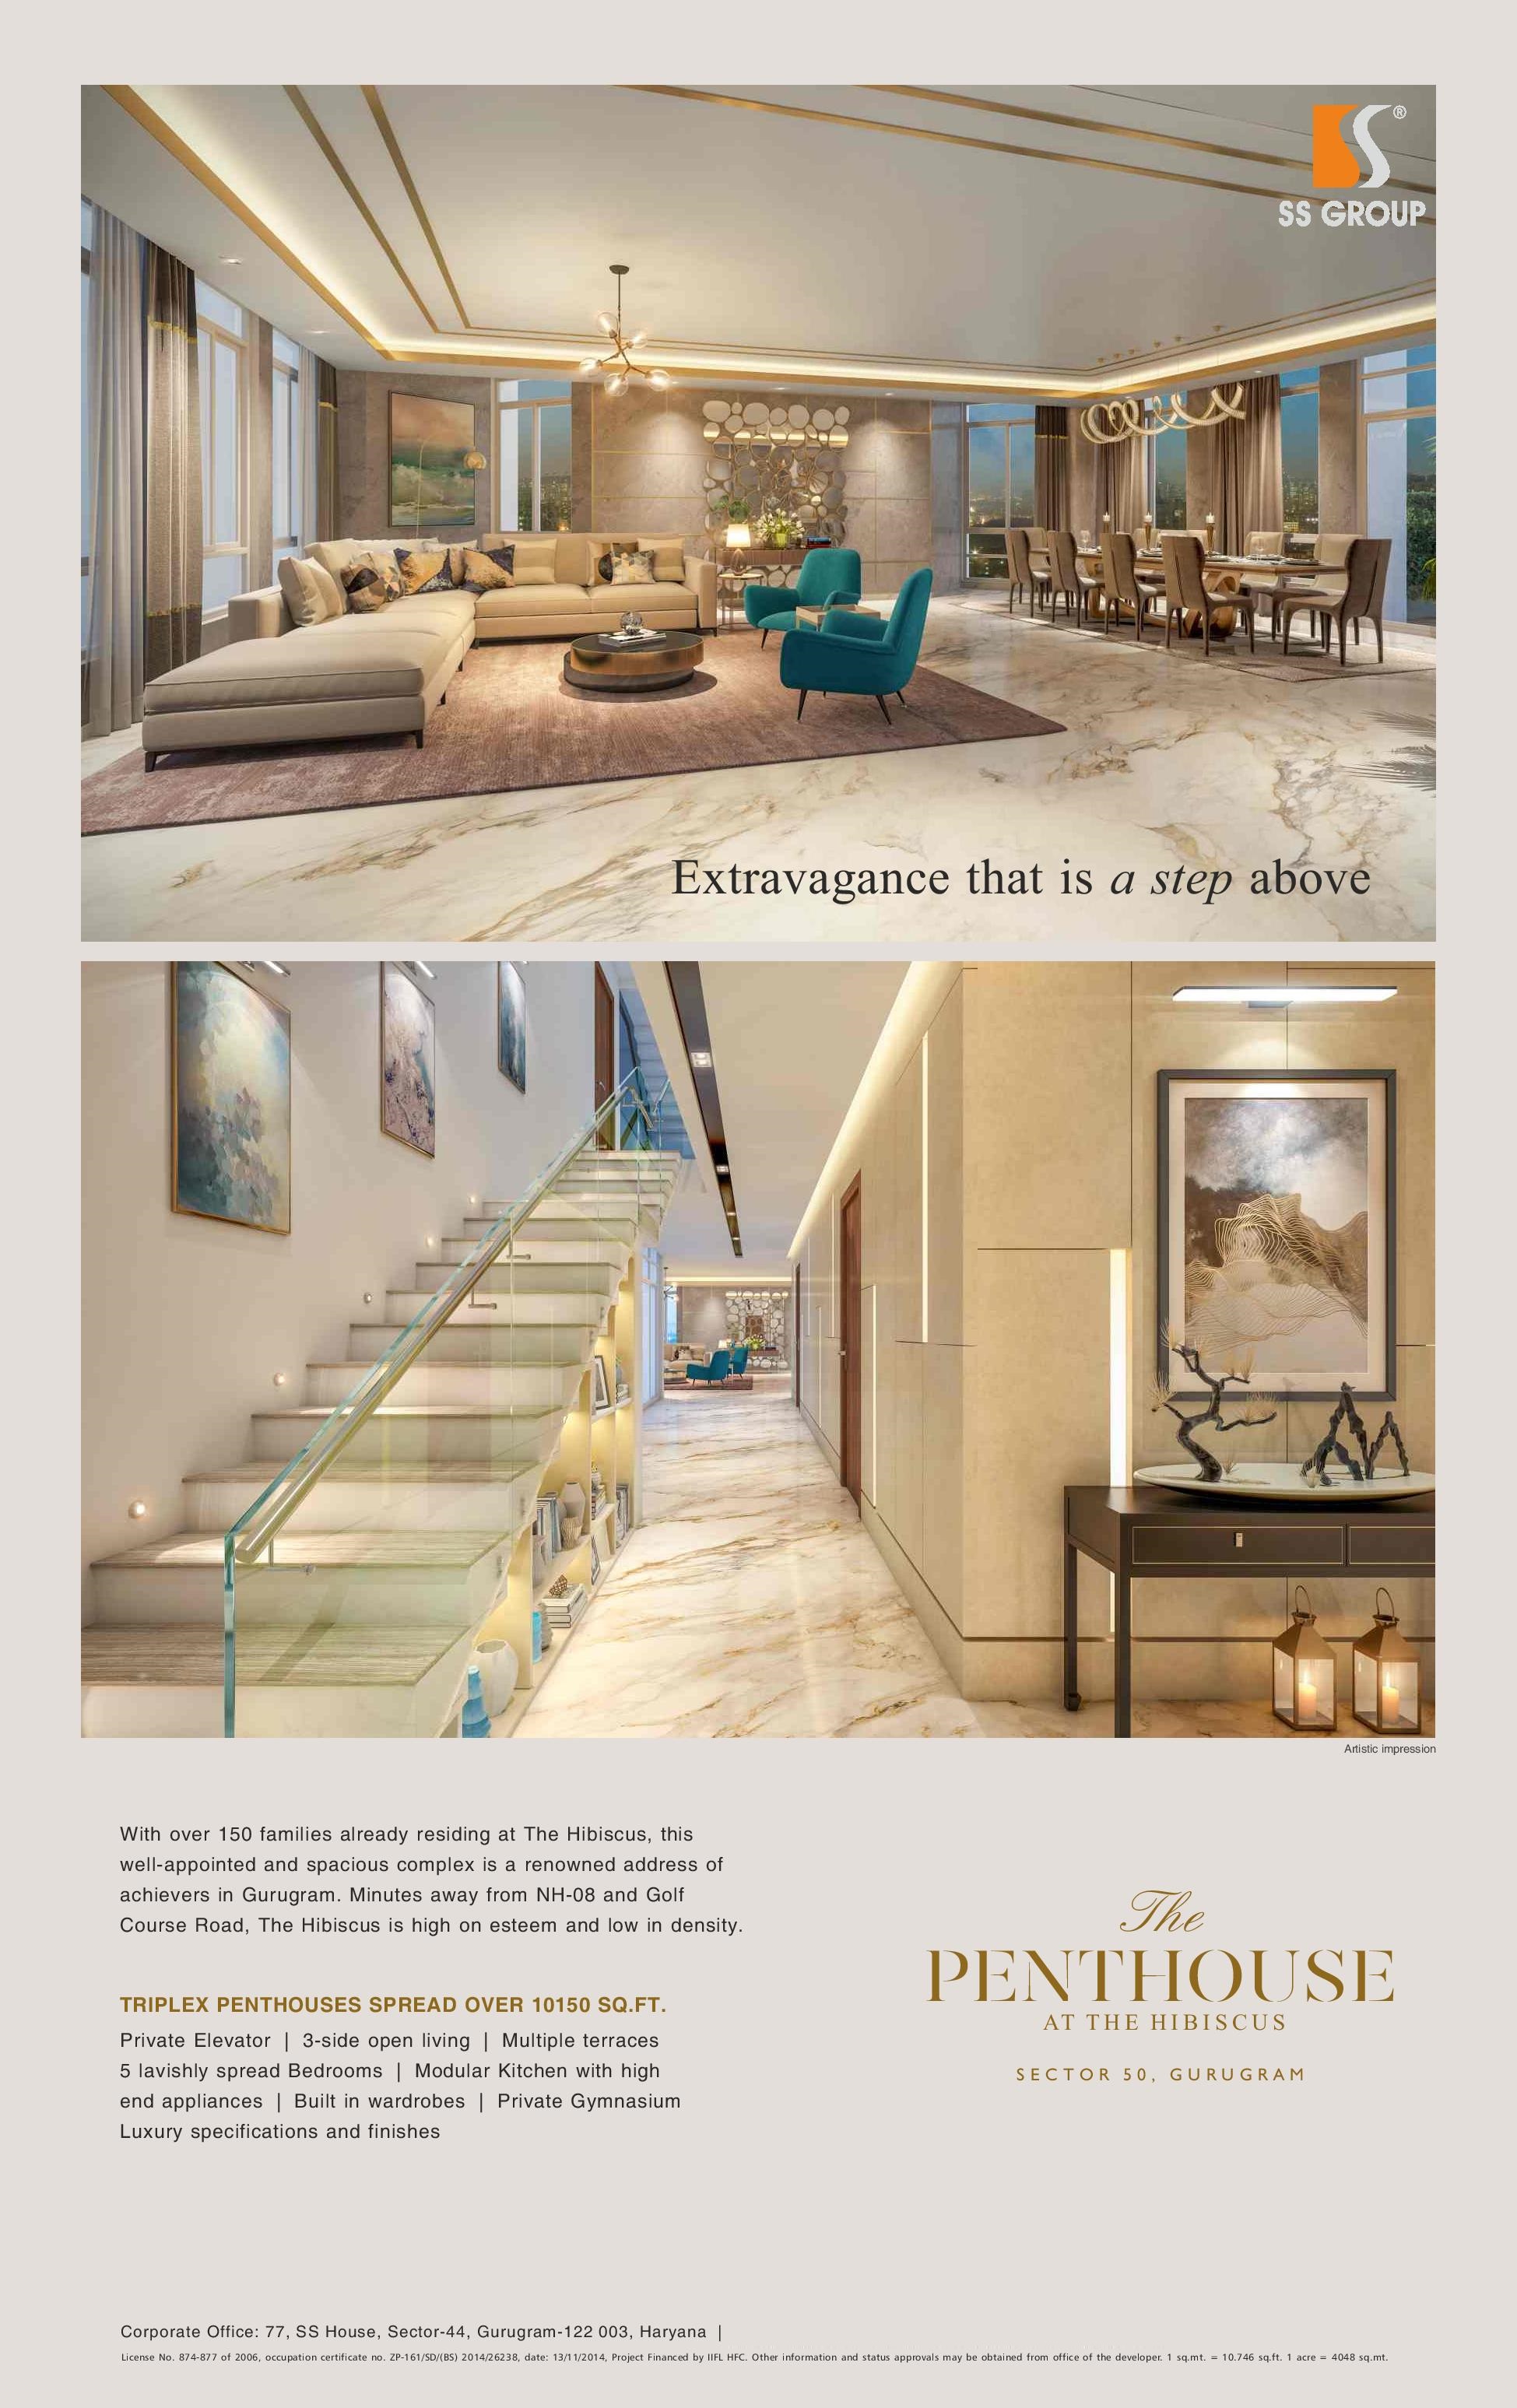 Book 5 BHK penthouse Rs 9 Cr at The Penthouse at SS The Hibiscus in Sector 50, Gurgaon